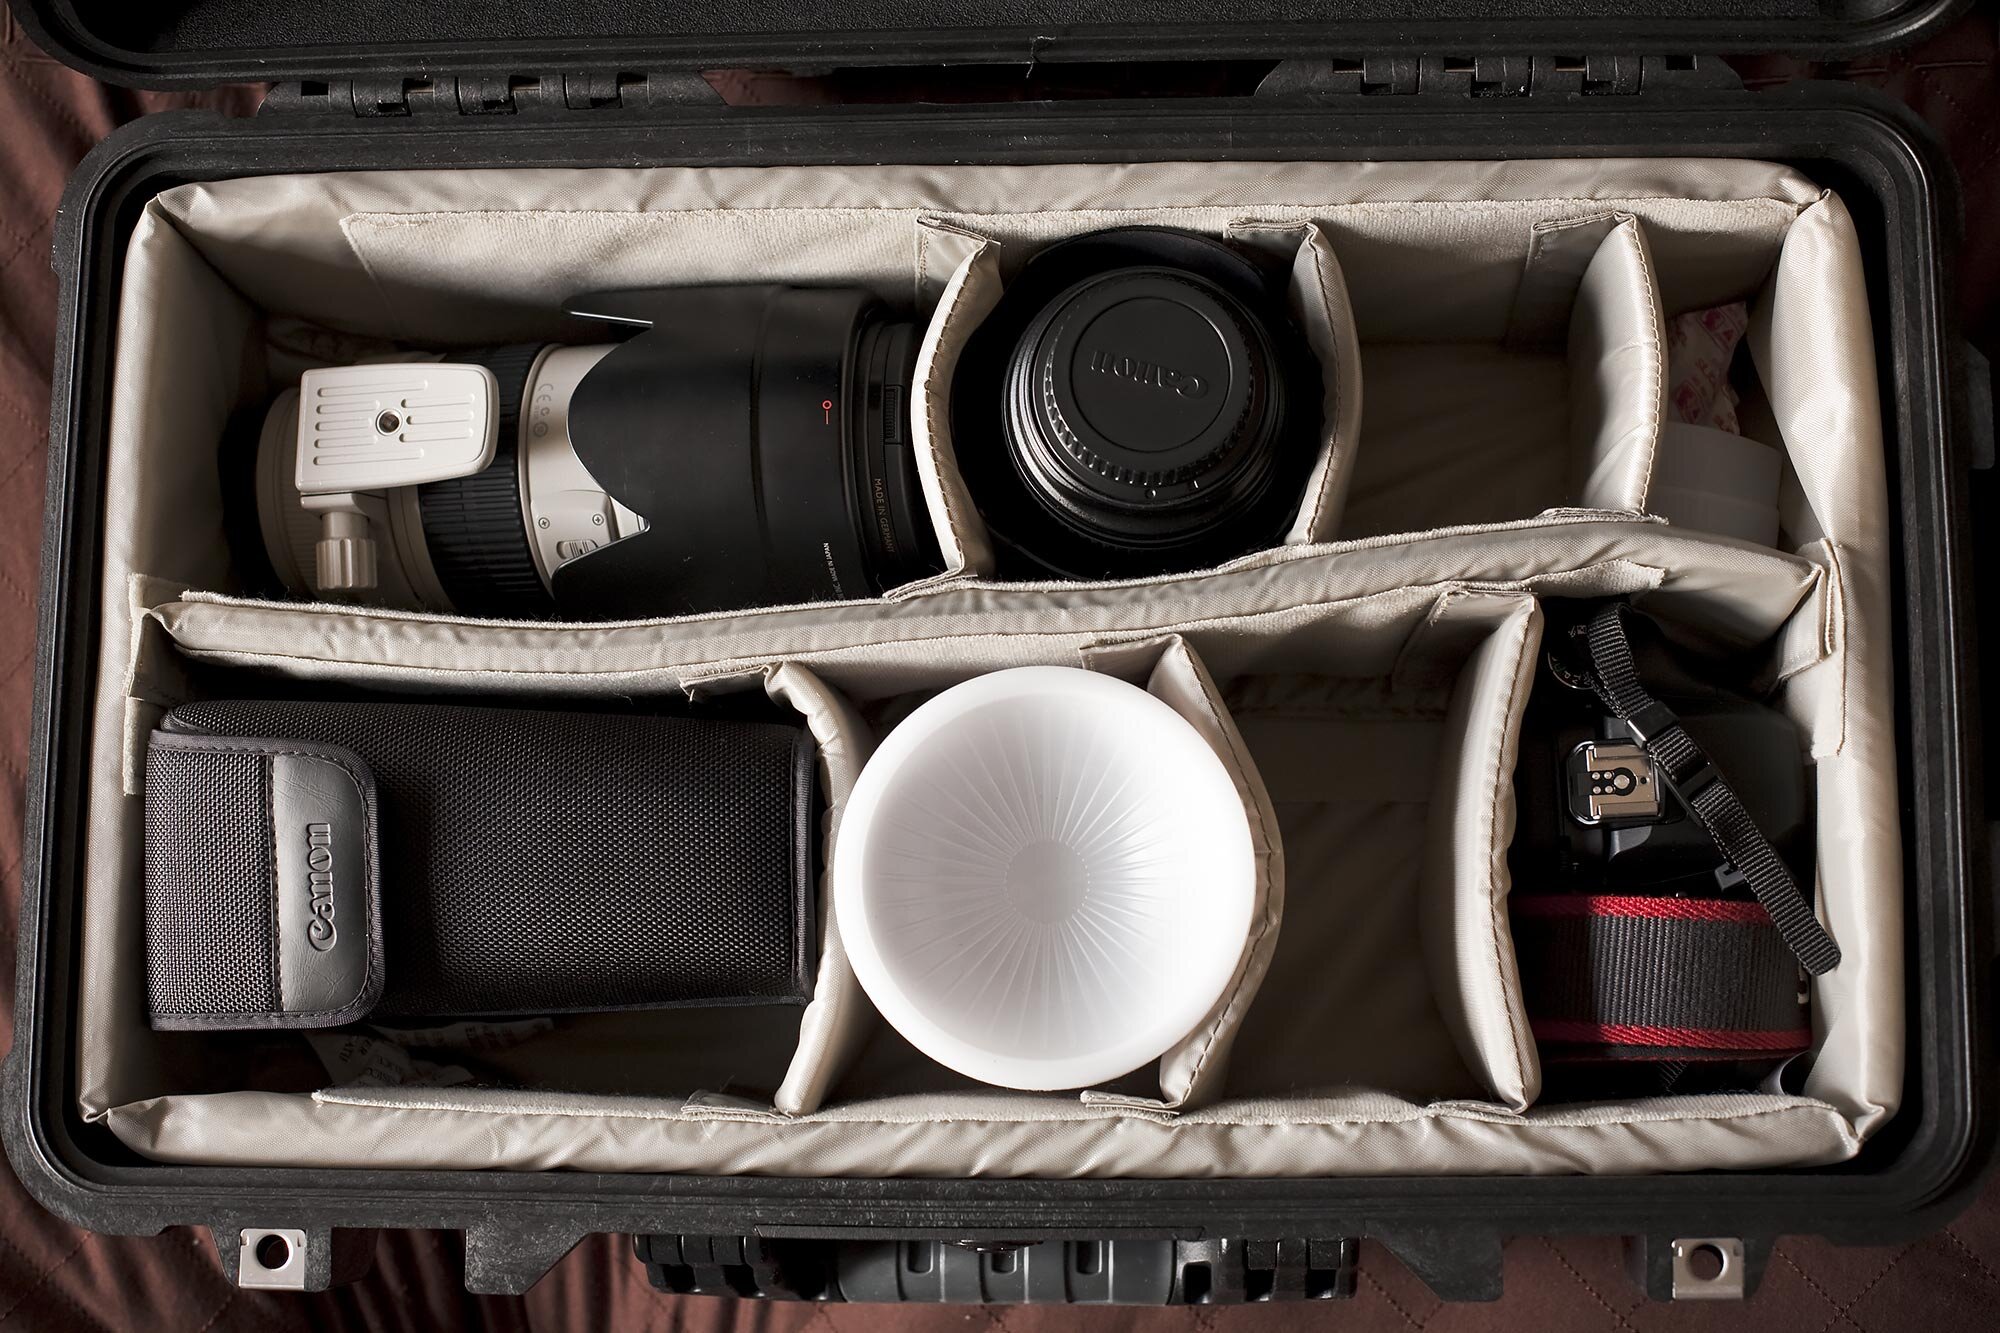 pelican-case-review-stephen-grant-photography-003.jpg